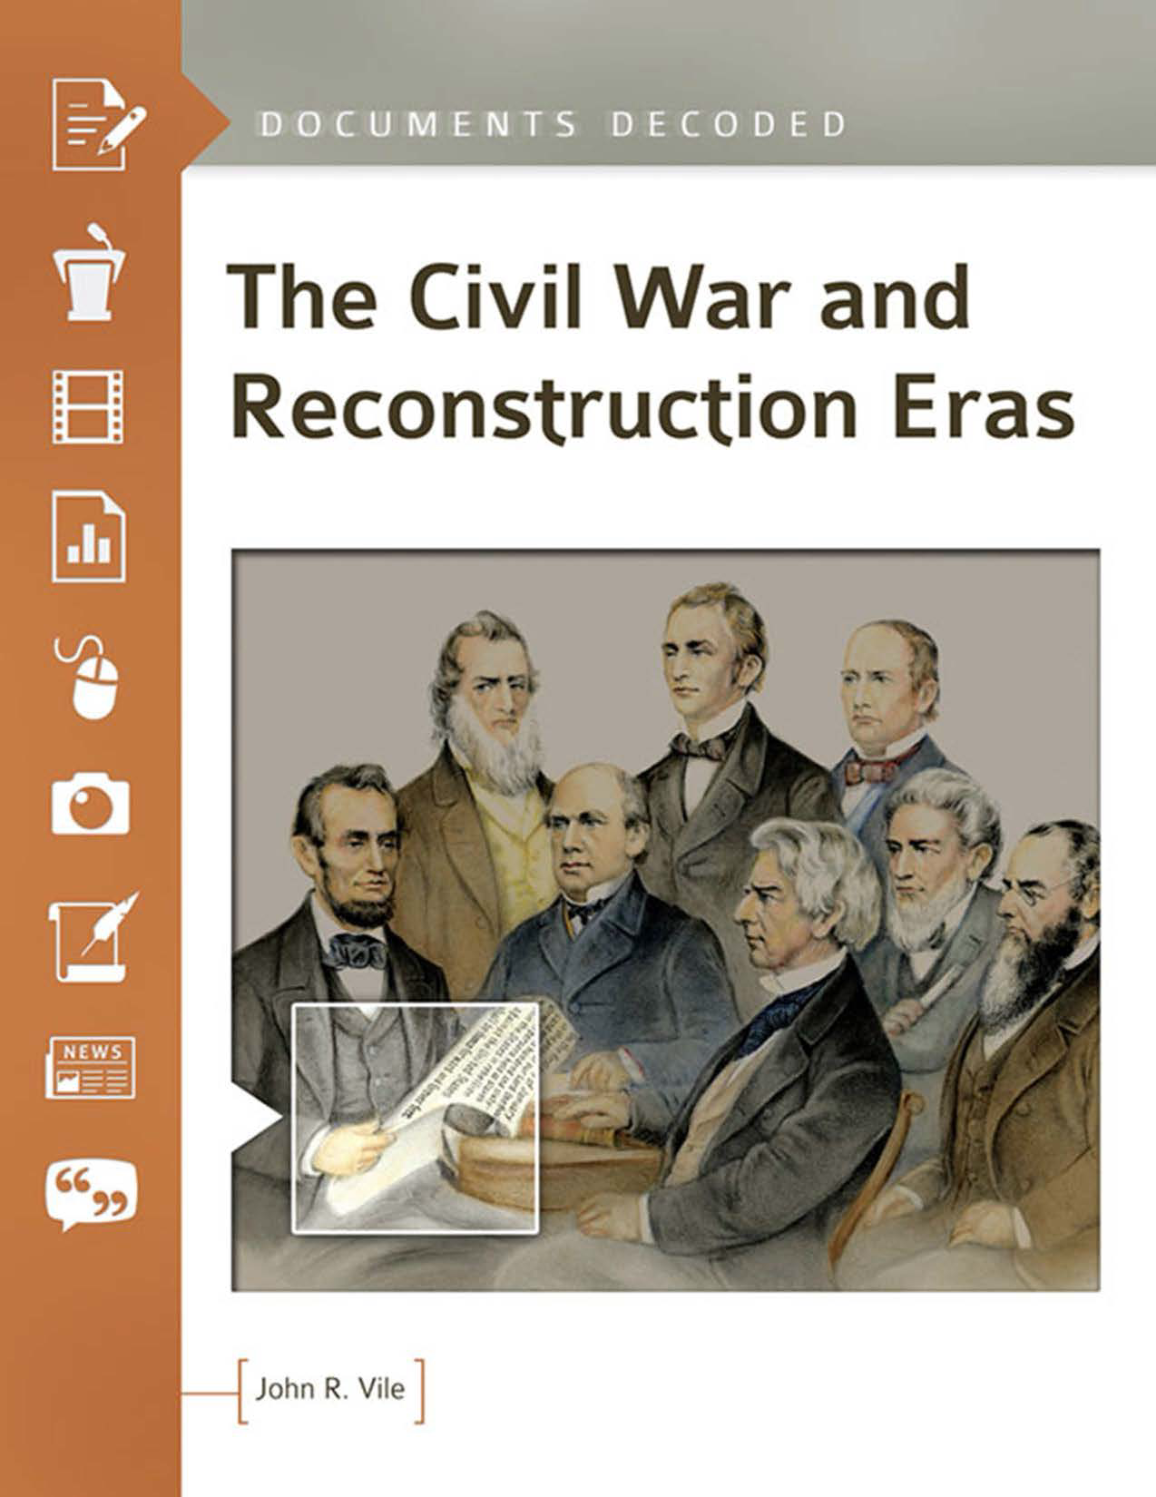 The Civil War and Reconstruction Eras: Documents Decoded page Cover1